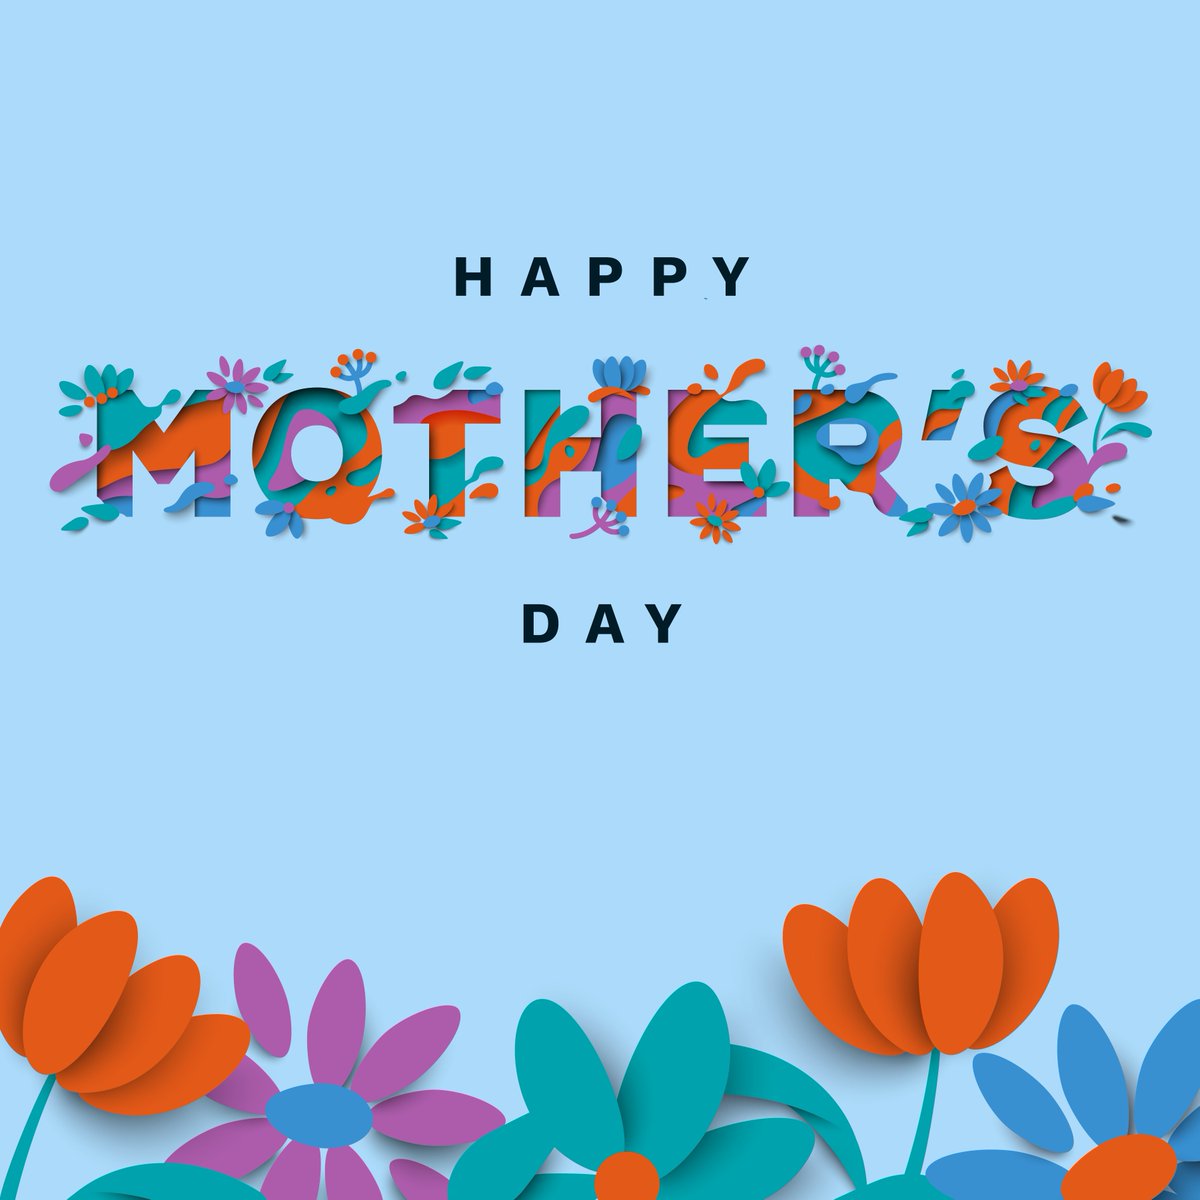 Happy Mother’s Day from EMILYs List!